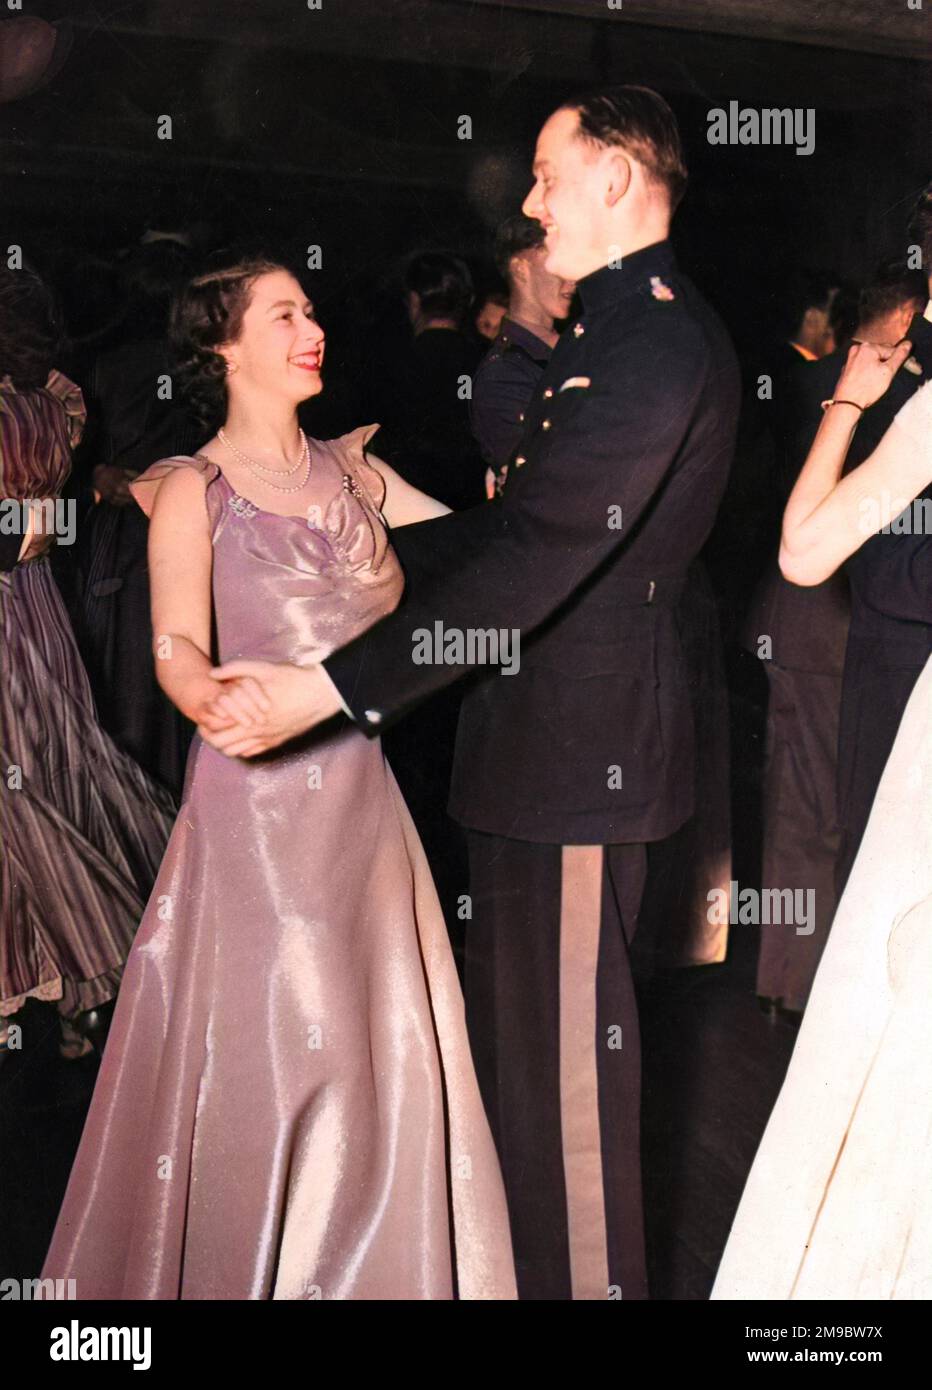 Princess Elizabeth (Queen Elizabeth II) attending a ball held at the Old House Hotel in aid of the NSPCC.  She is pictured smiling as she dances with Captain Joshua Rayley of the Grenadier Guards. Stock Photo